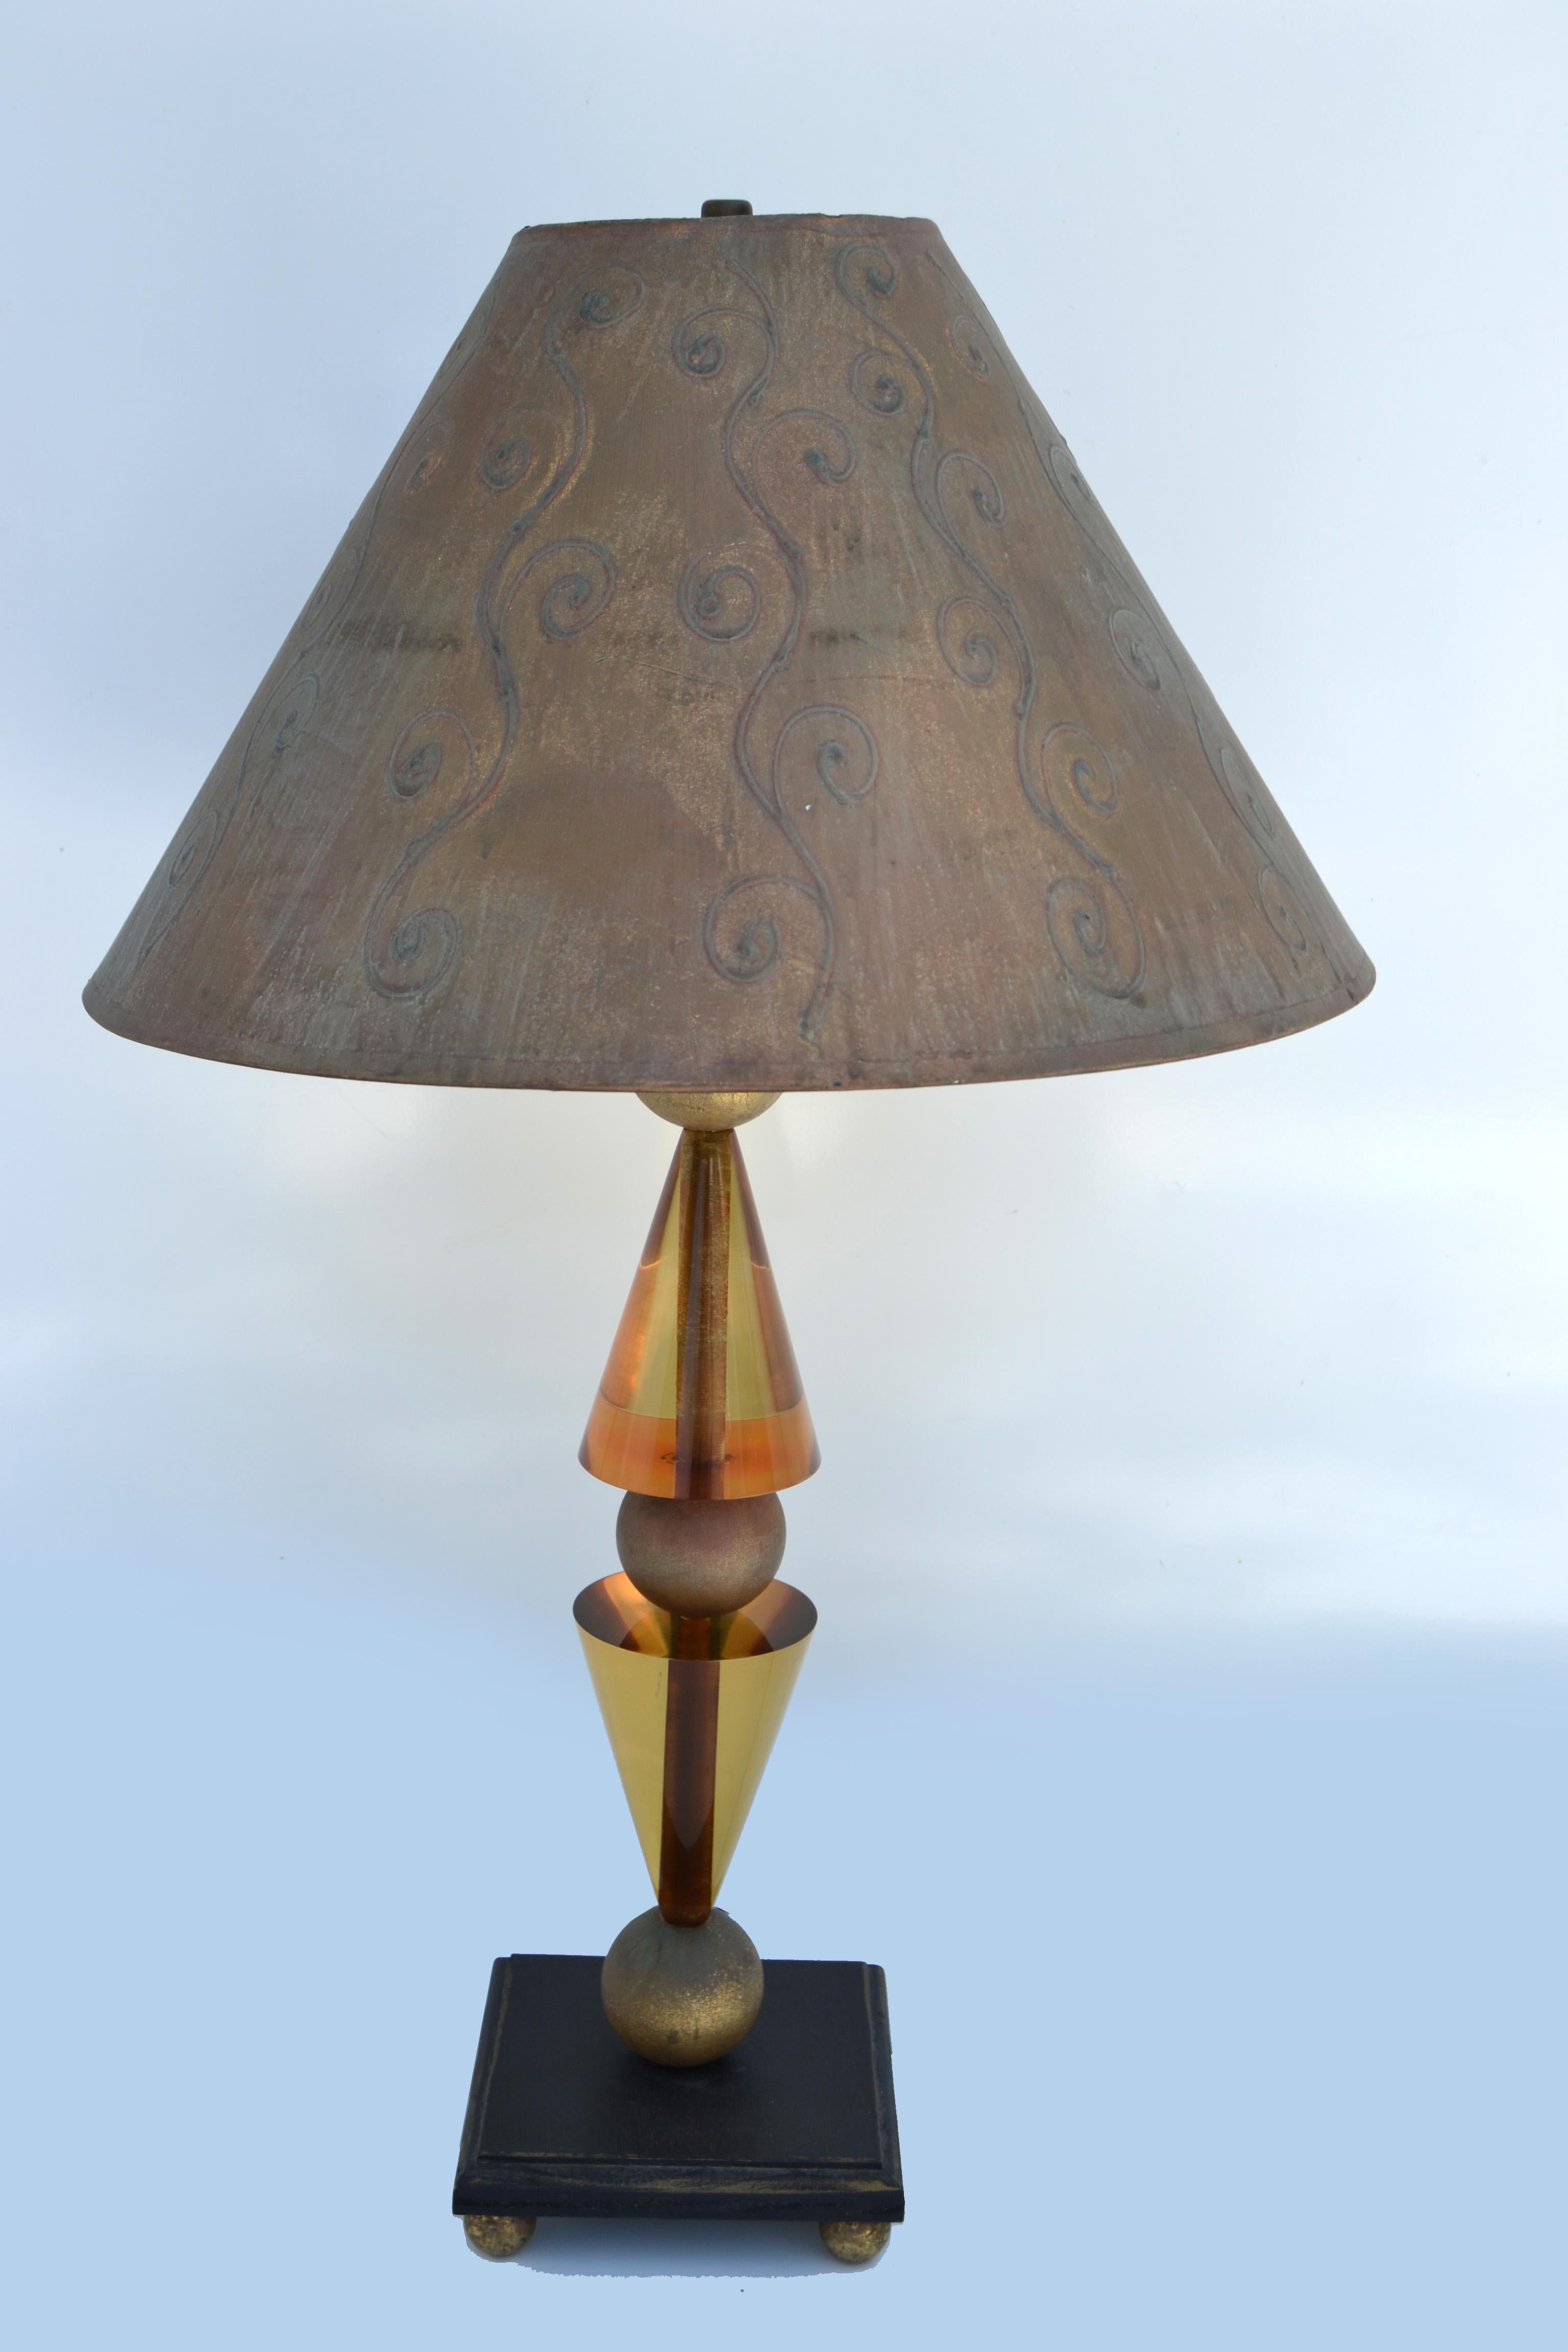 Van teal table lamp Mid-Century Modern geometric Lucite Cones and gilded round wood balls with the original shade on wooden base. 
In working condition, UL listed and takes a regular or LED light bulb.
Base measures 6 x 6 inches square.
Height to